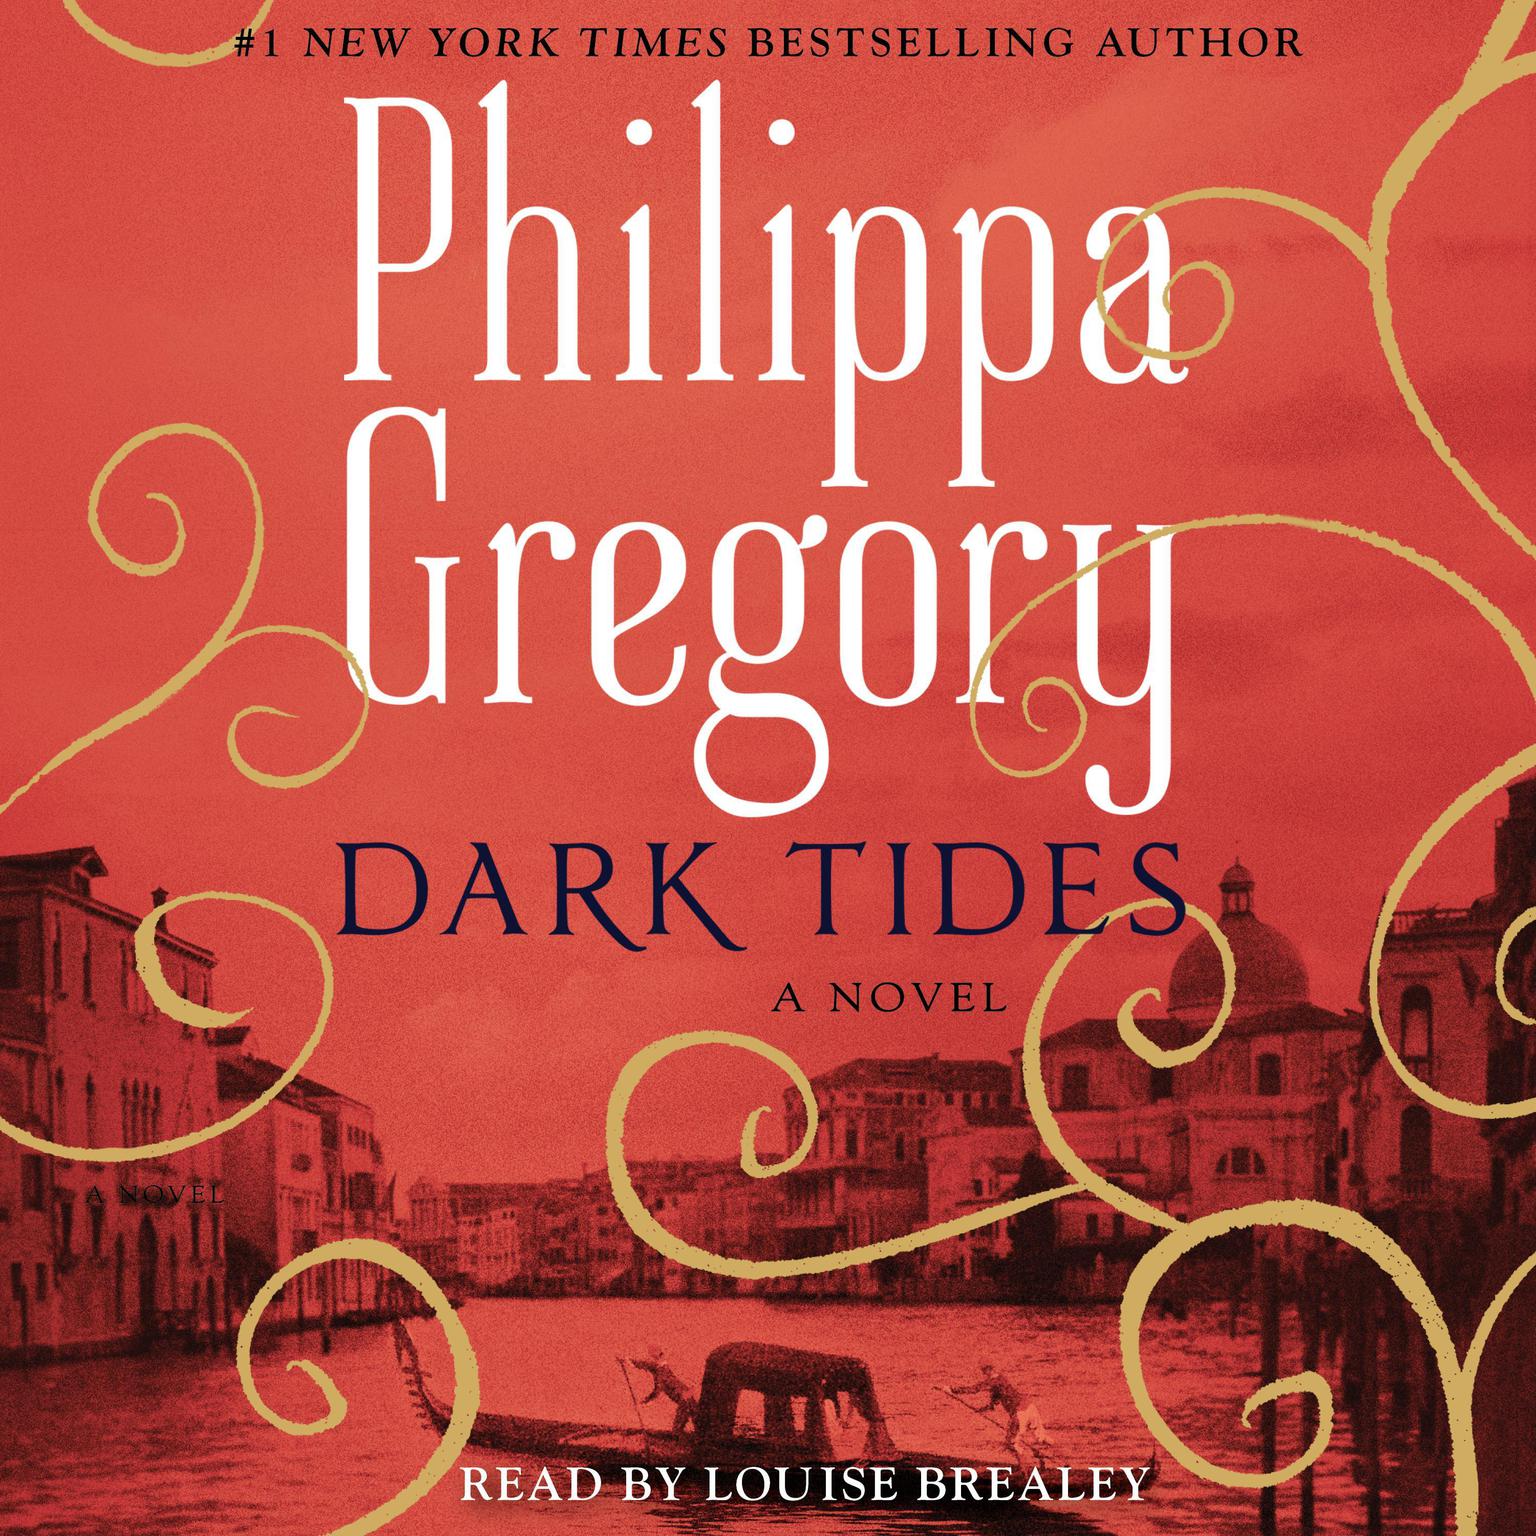 Dark Tides: A Novel Audiobook, by Philippa Gregory